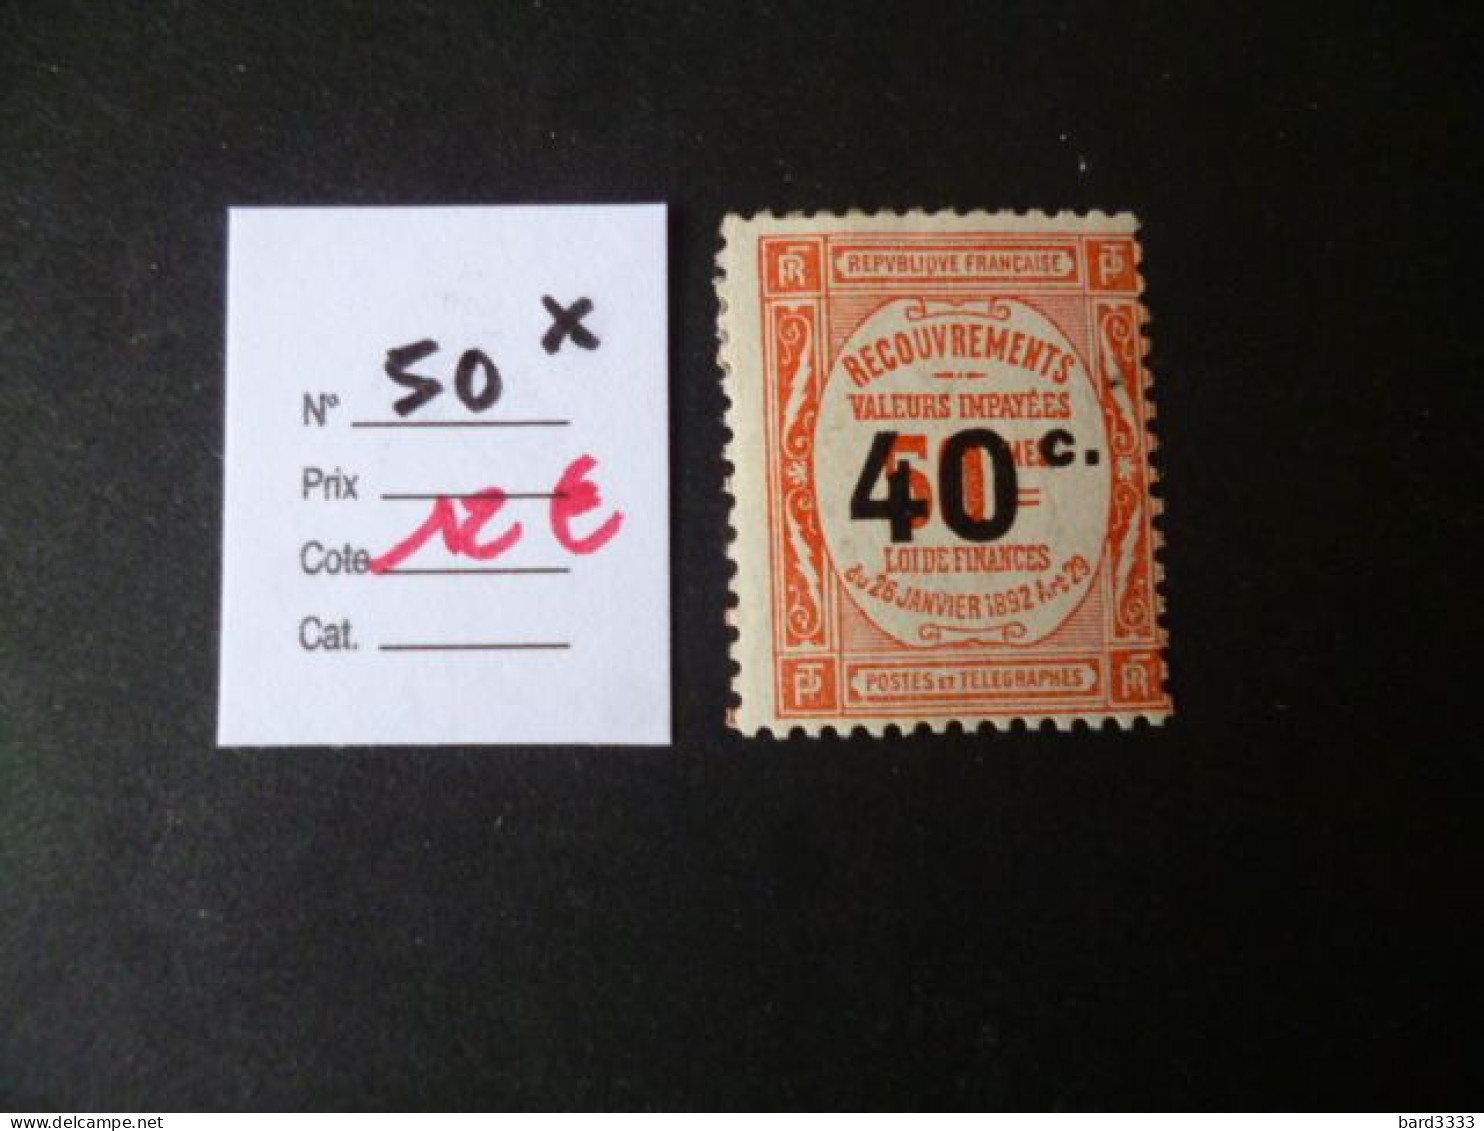 Timbre France Neuf * Taxe N° 50 Cote 12 € - 1859-1959 Mint/hinged